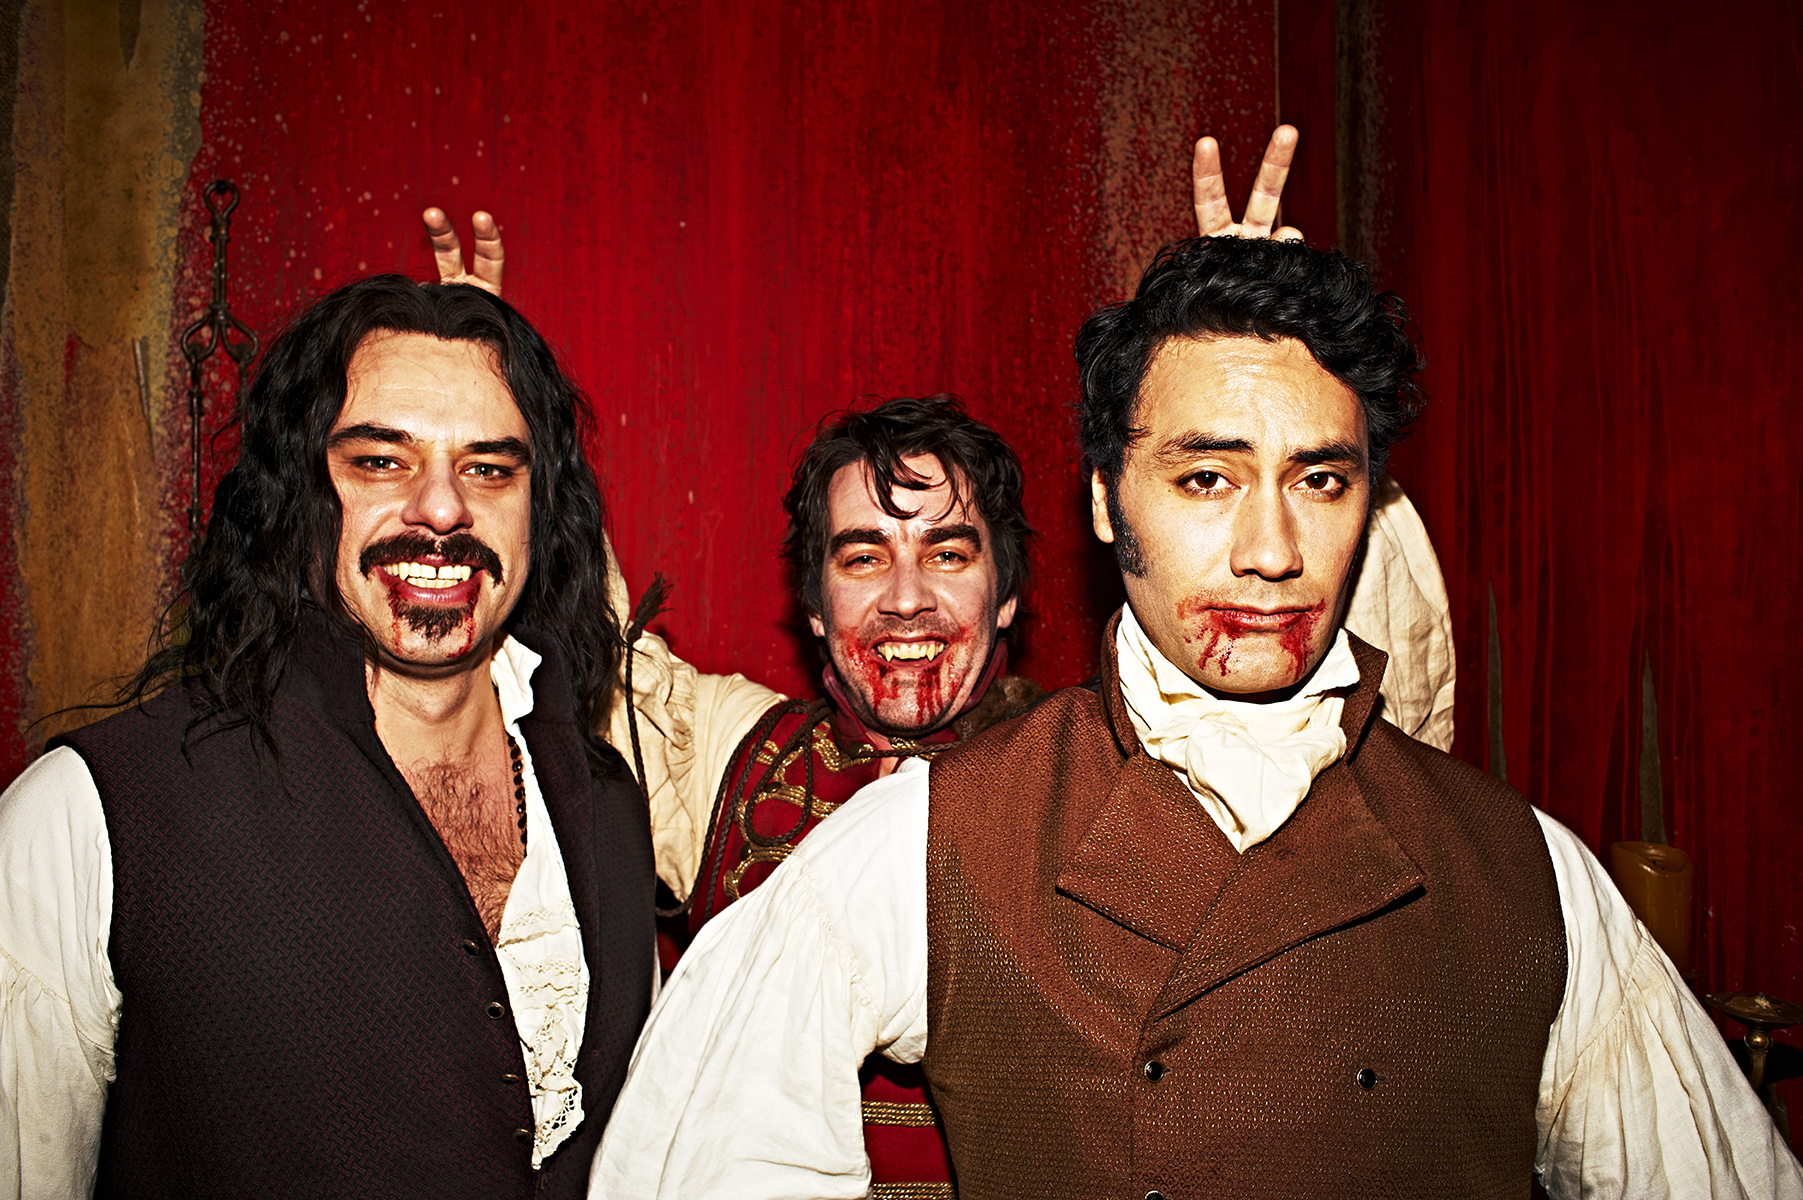 Jemaine Clement and Taika Waititi on Giving Vampires New Life In ‘What